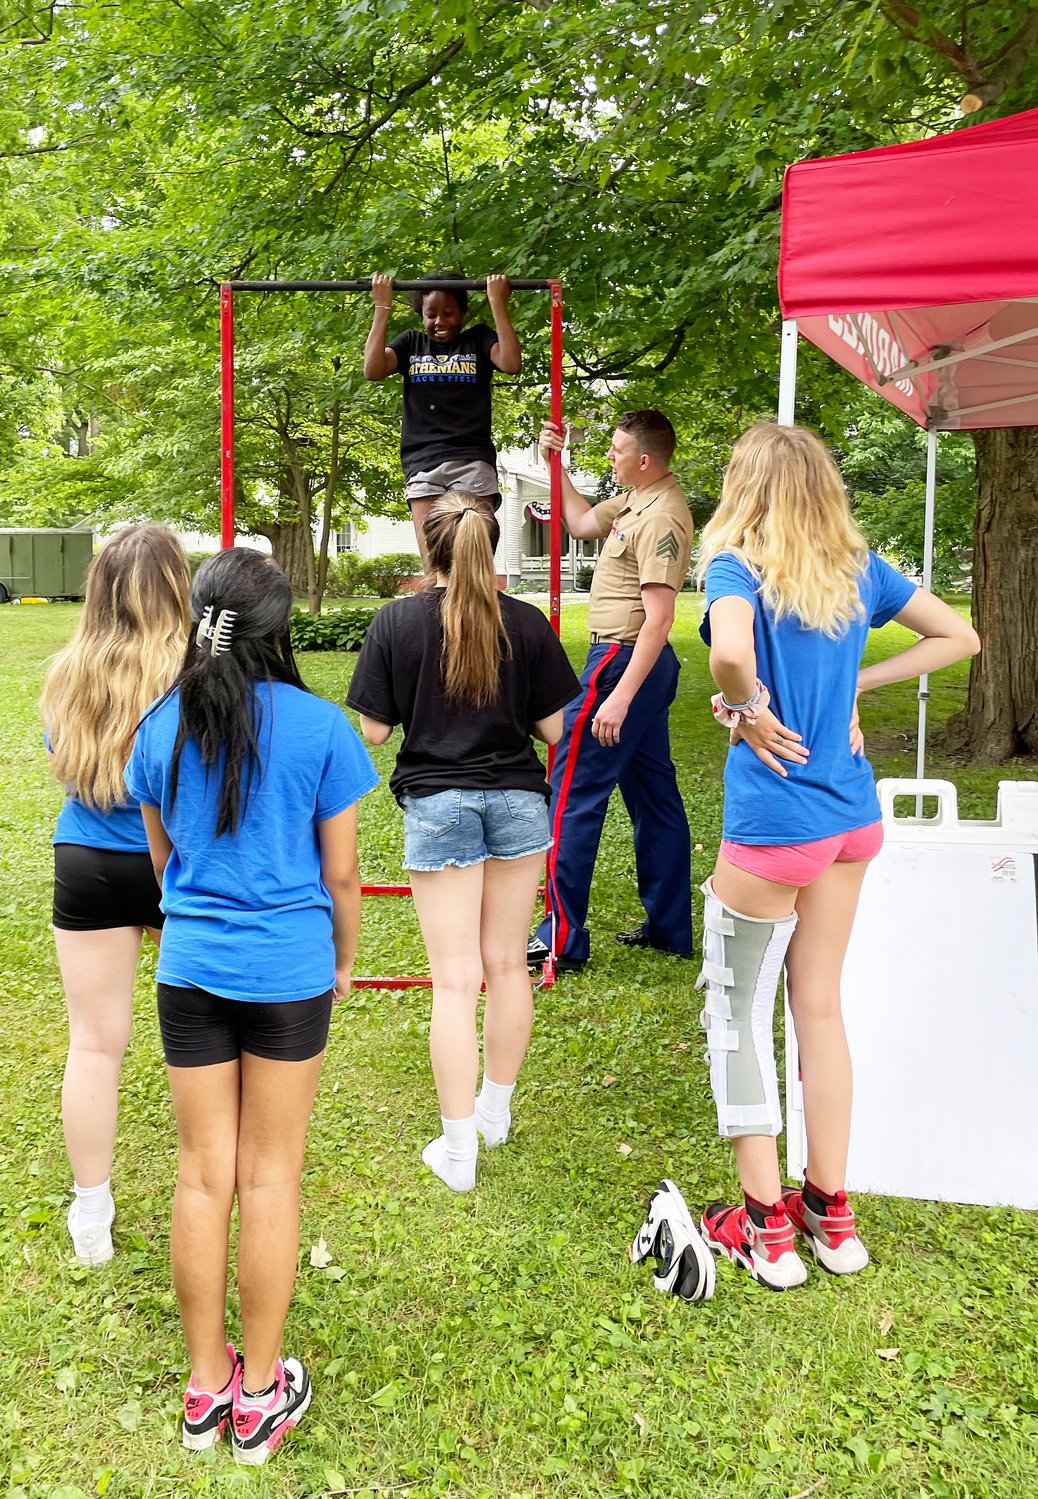 A Crawfordsville High School cheerleader participates in a pull-up challenge issued by members of the US Marine Corps.